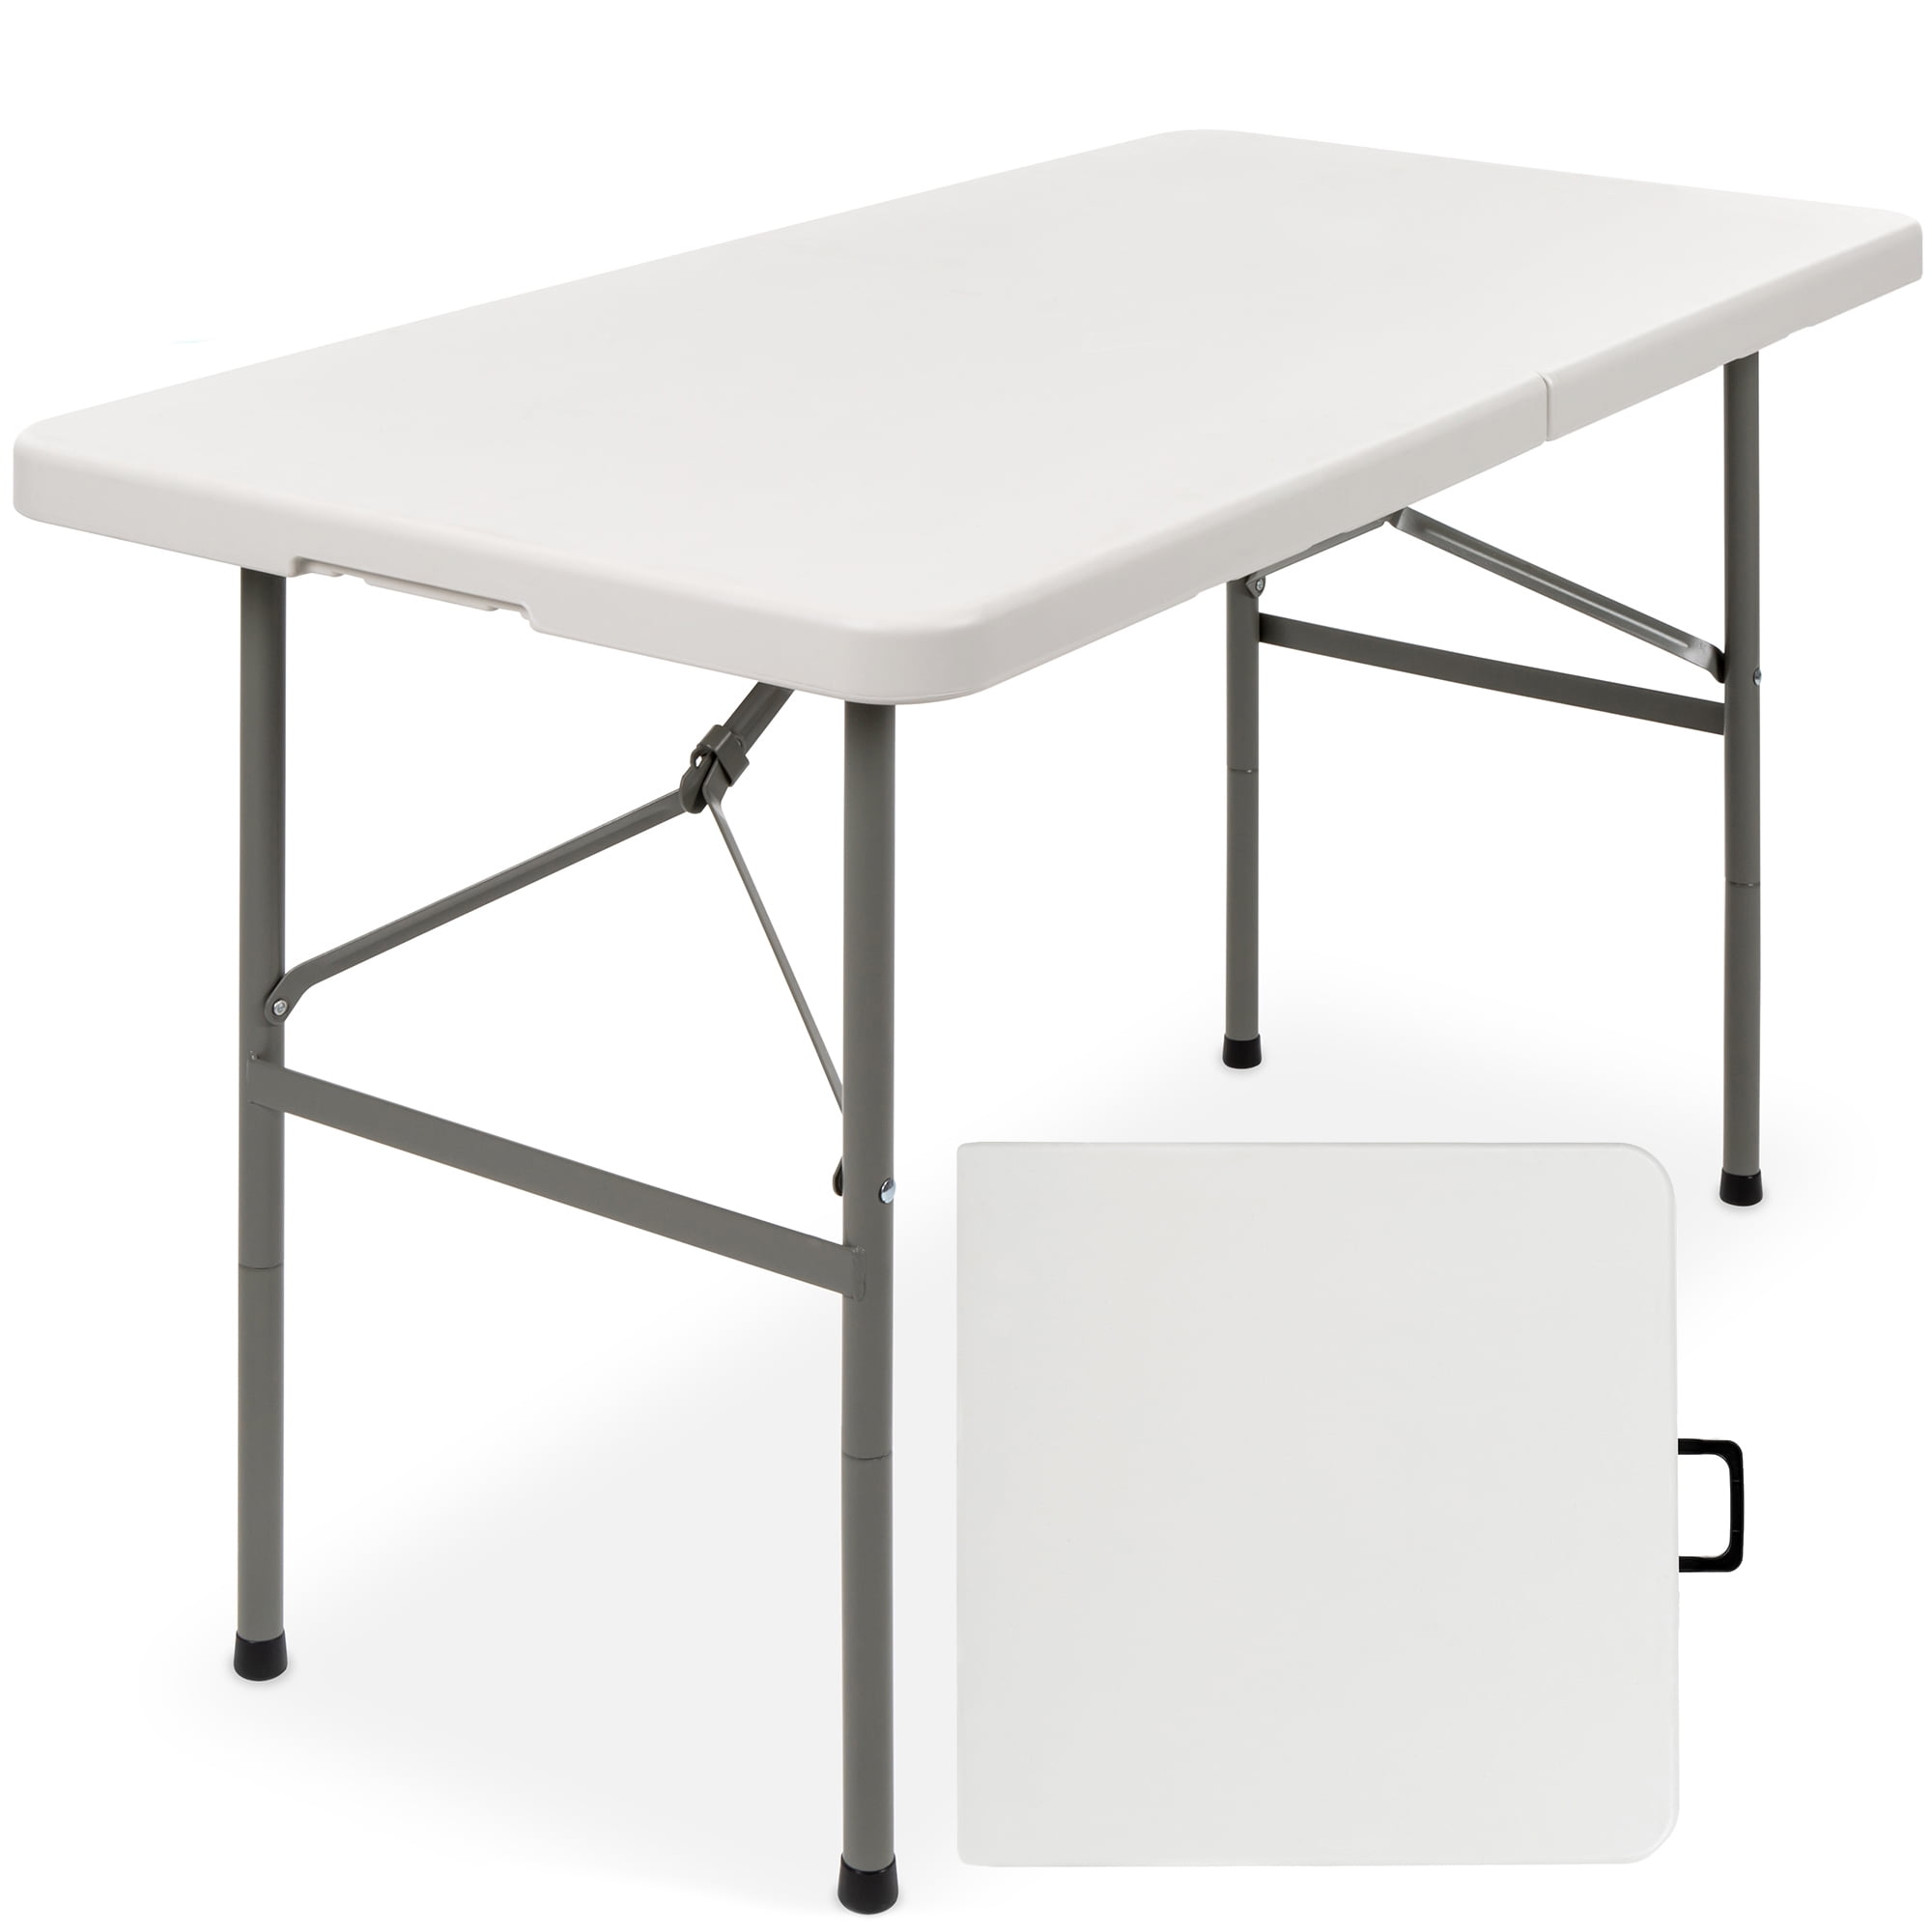 Folding Table Wallpaper Camping 4 FT Plastic Portable Foldable Lightweight New 